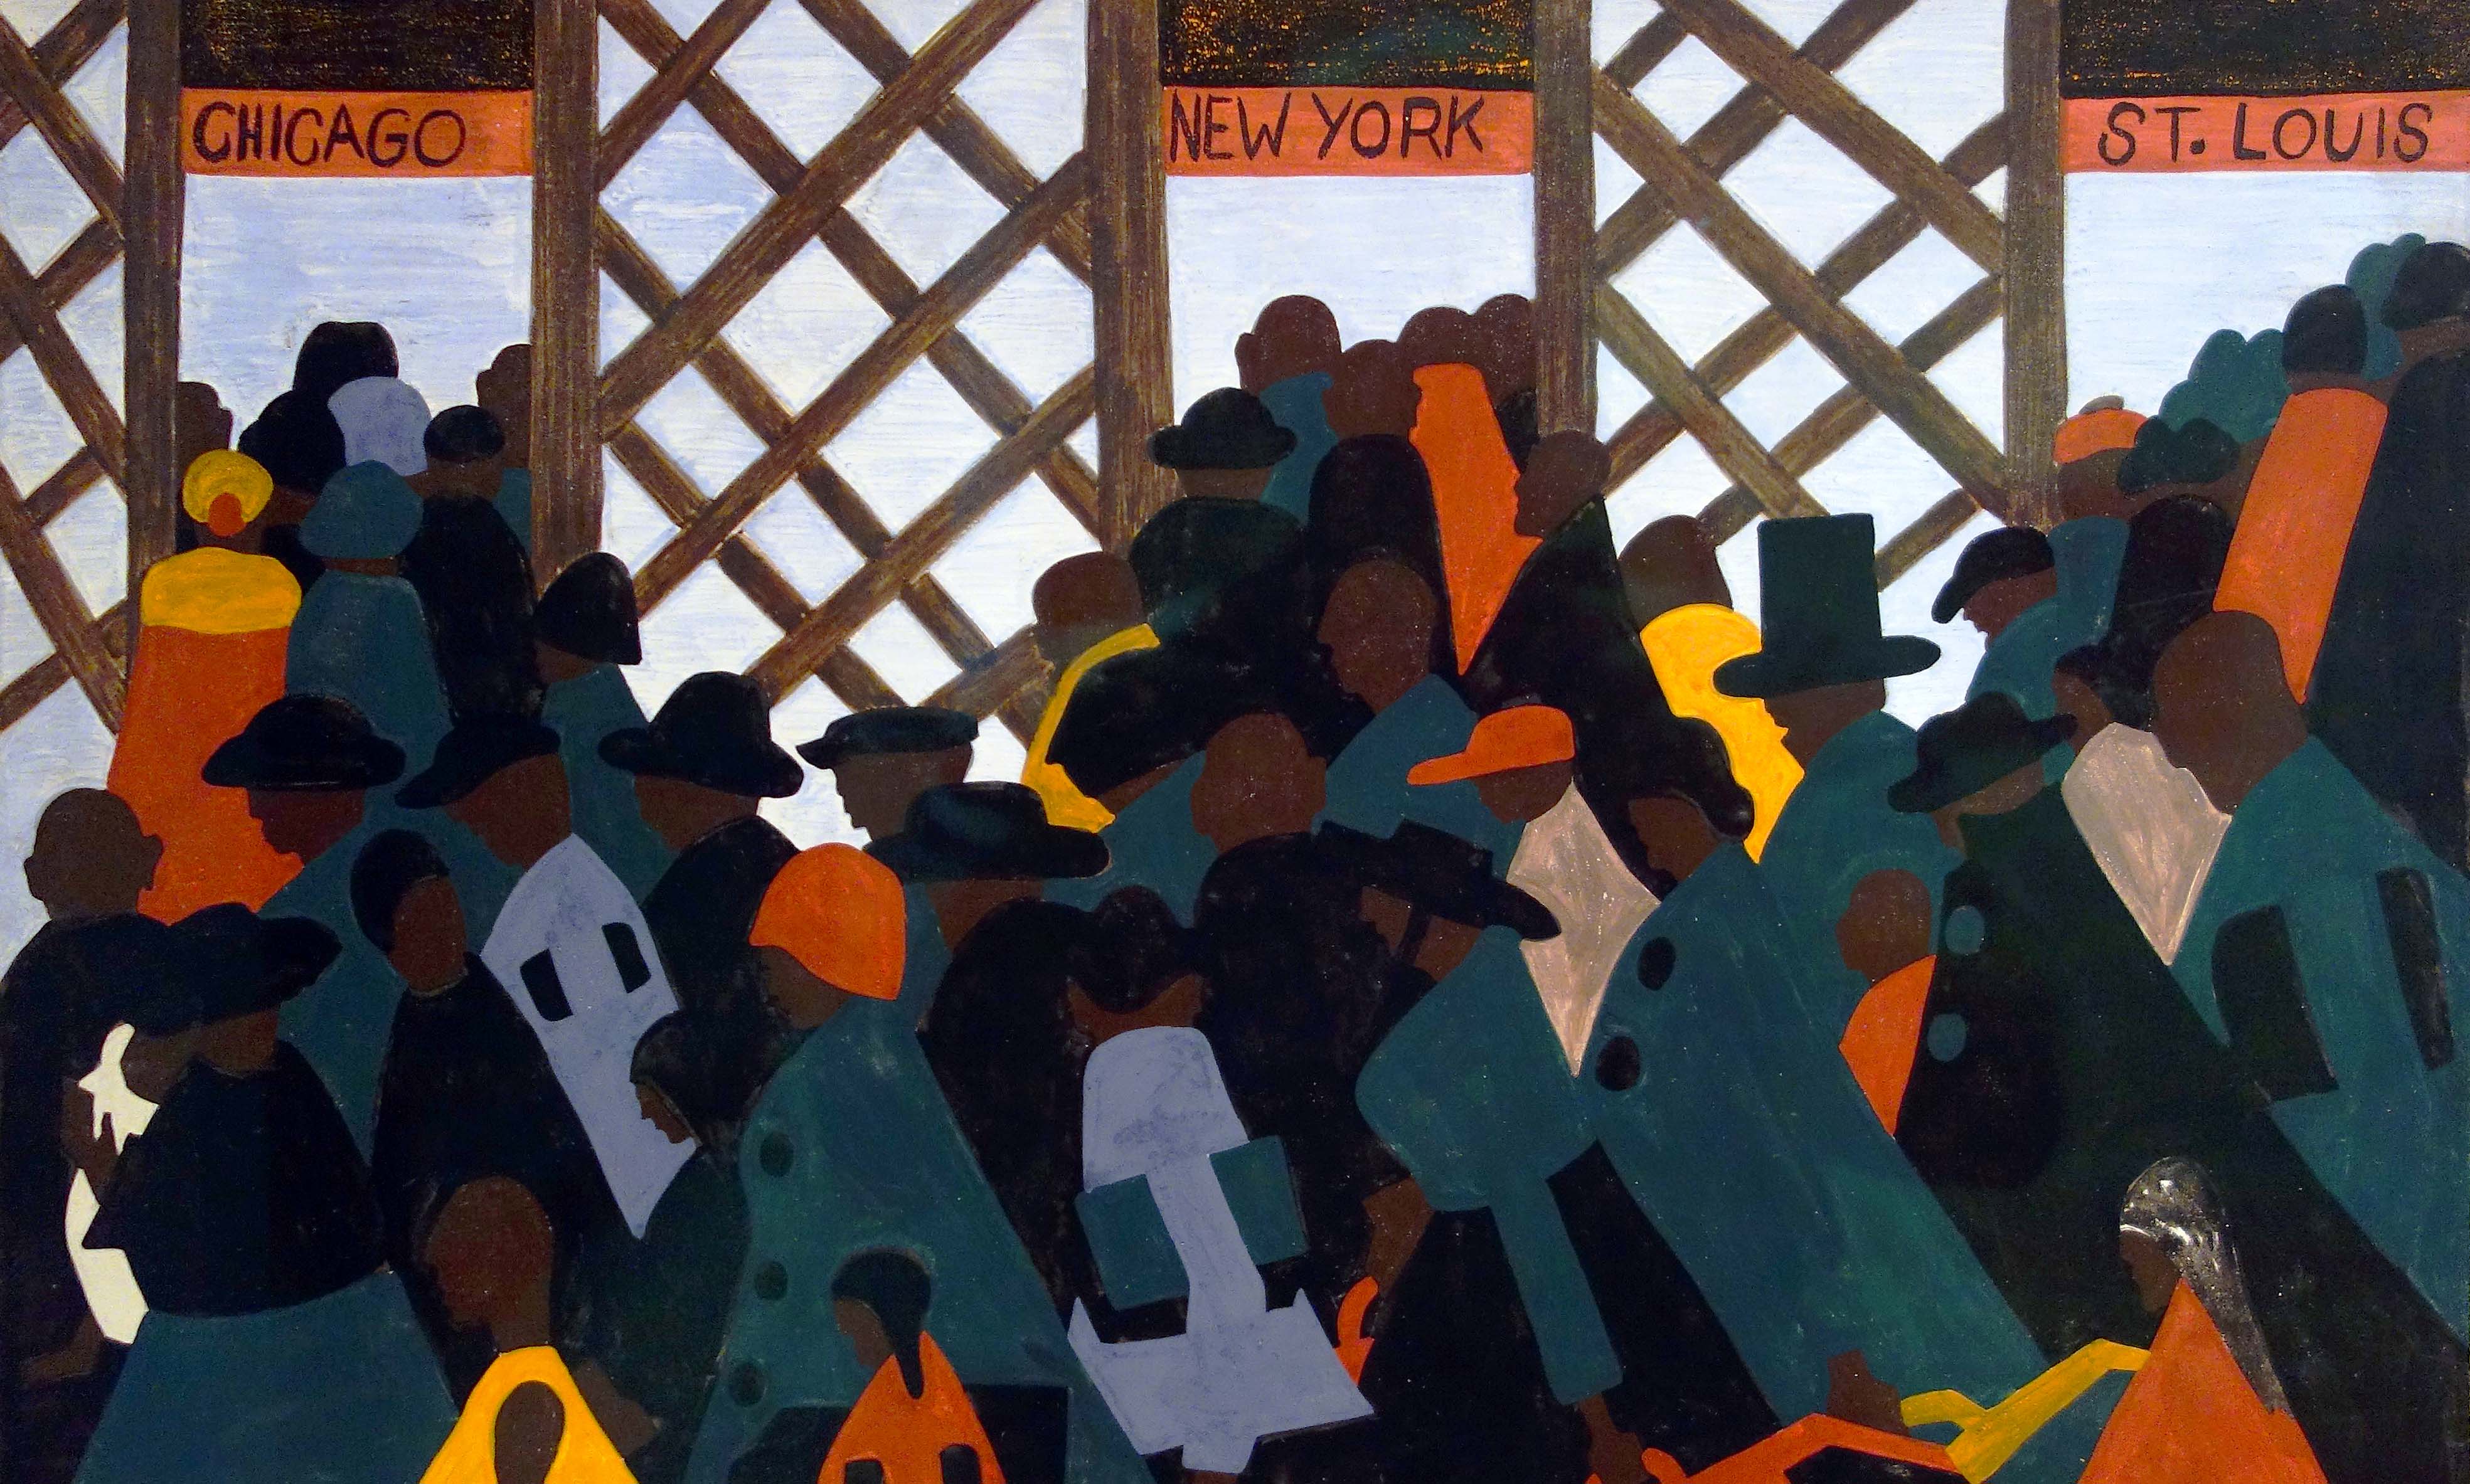 Jacob Lawrence, The Migration Series, 1940-41, 60 panels, tempera on hardboard (even numbers at The Museum of Modern Art, New York, odd numbers at the Phillips Collection, Washington D.C.)